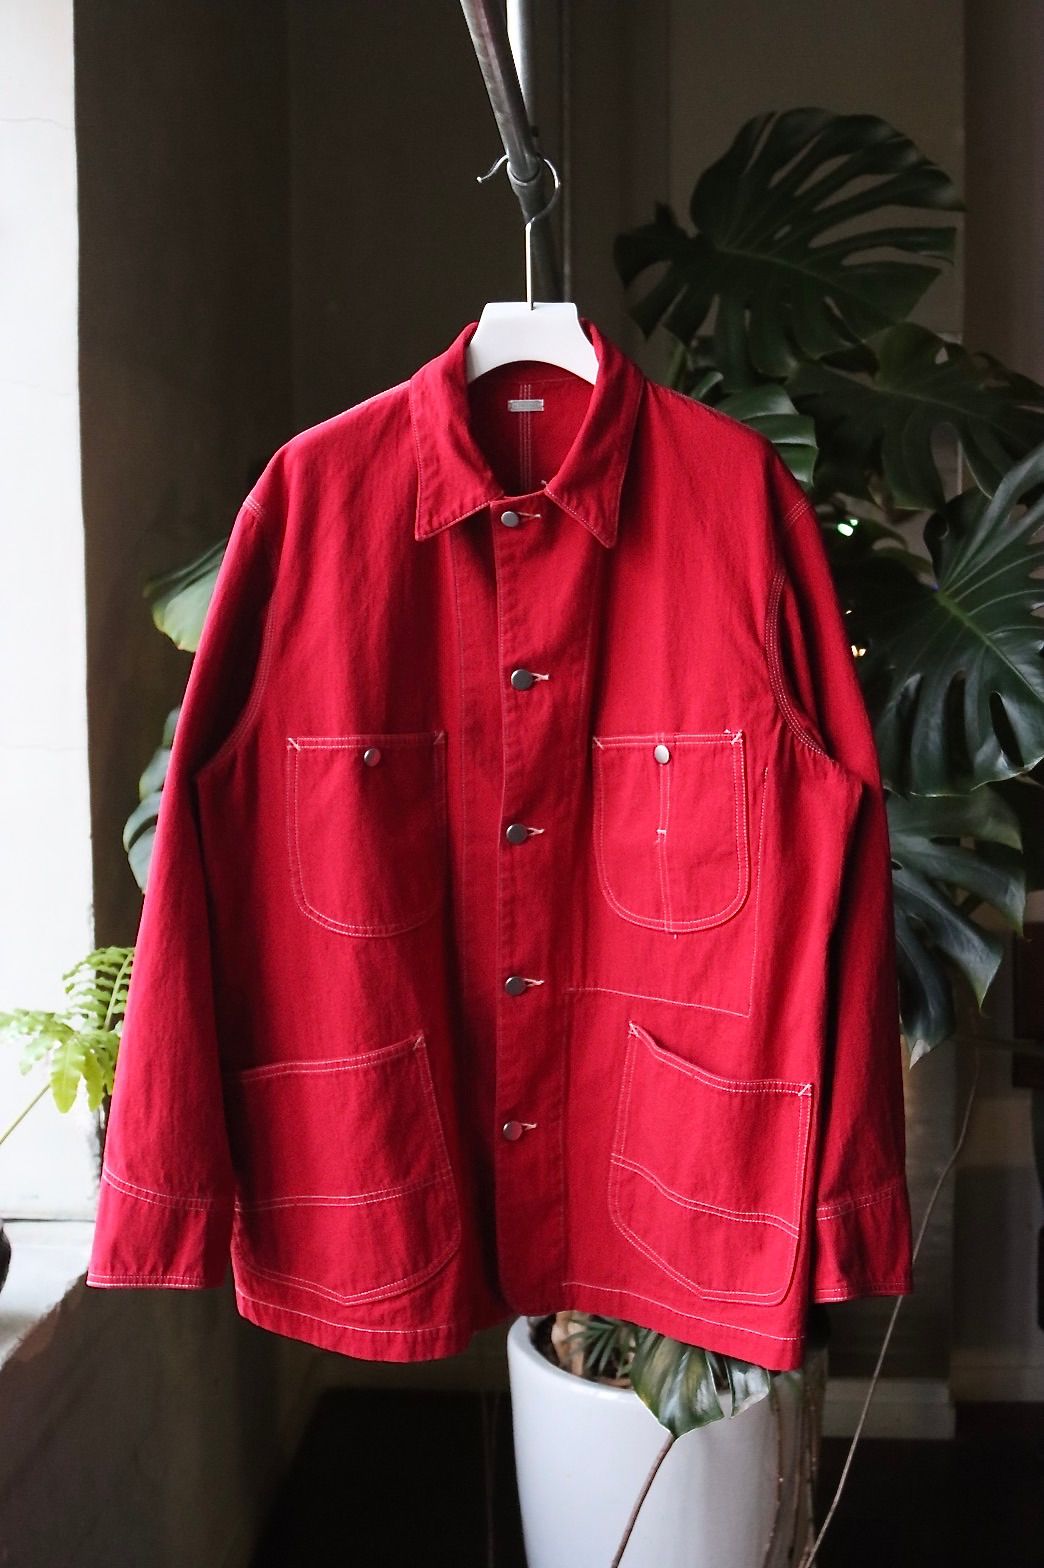 A.PRESSE - アプレッセ 22SS Coverall Jacket(22SAP-01-05M)RED 